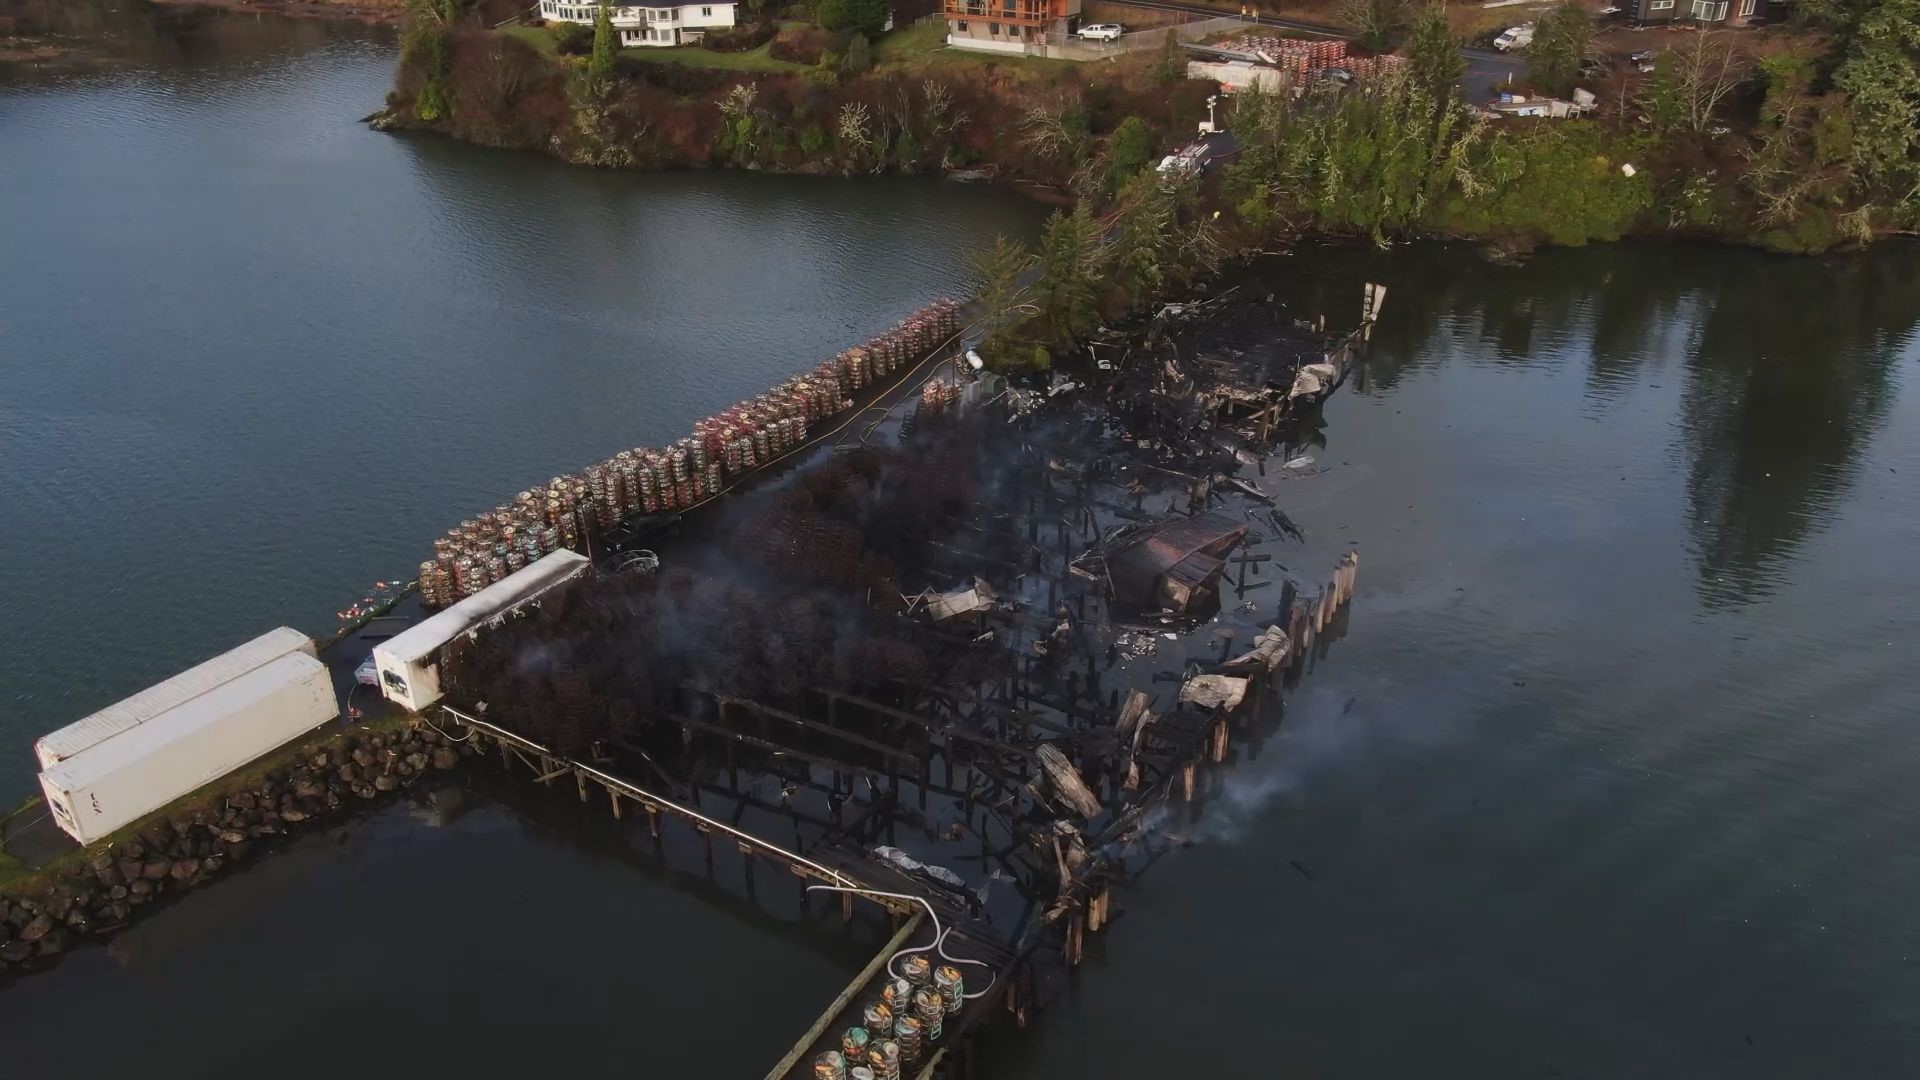 Aerials of Ilwaco seafood facility destroyed in fire | king5.com